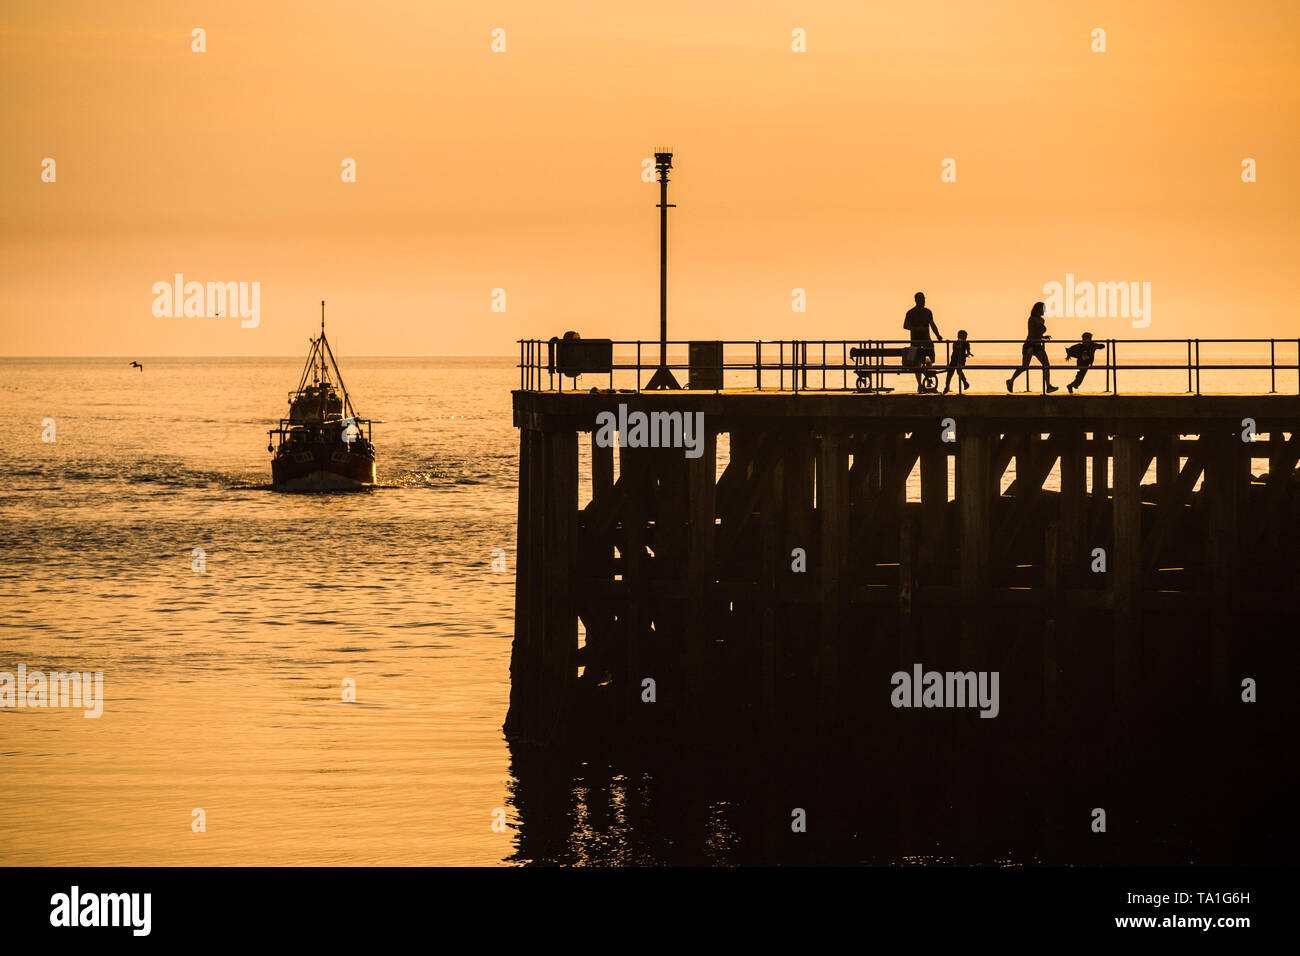 Aberystwyth Wales Uk. Tuesday 21 May 2019  UK weather: Inshore fishing boats are silhouetted as they return to Aberystwyth harbour with the high tide in the evening after a day out catching Cardigan Bay crab and lobster.   photo Credit: Keith Morris/Alamy Live News Stock Photo